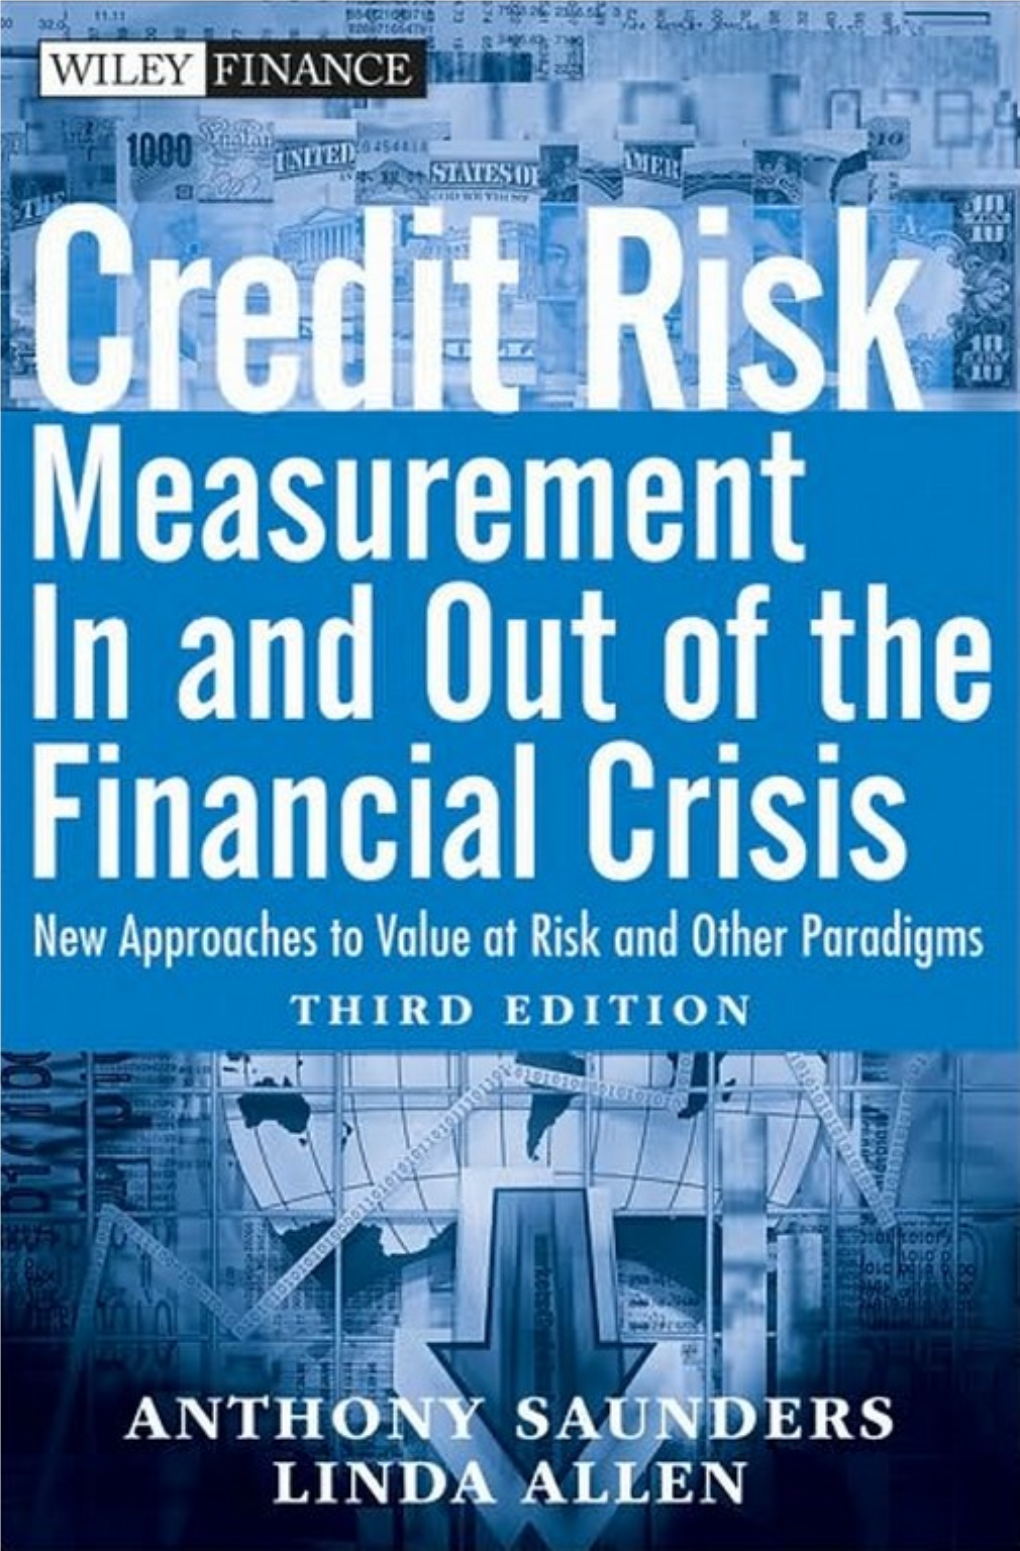 Credit Risk Measurement in and out of the Financial Crisis E1FFIRS 02/27/2010 1:15:59 Page 2